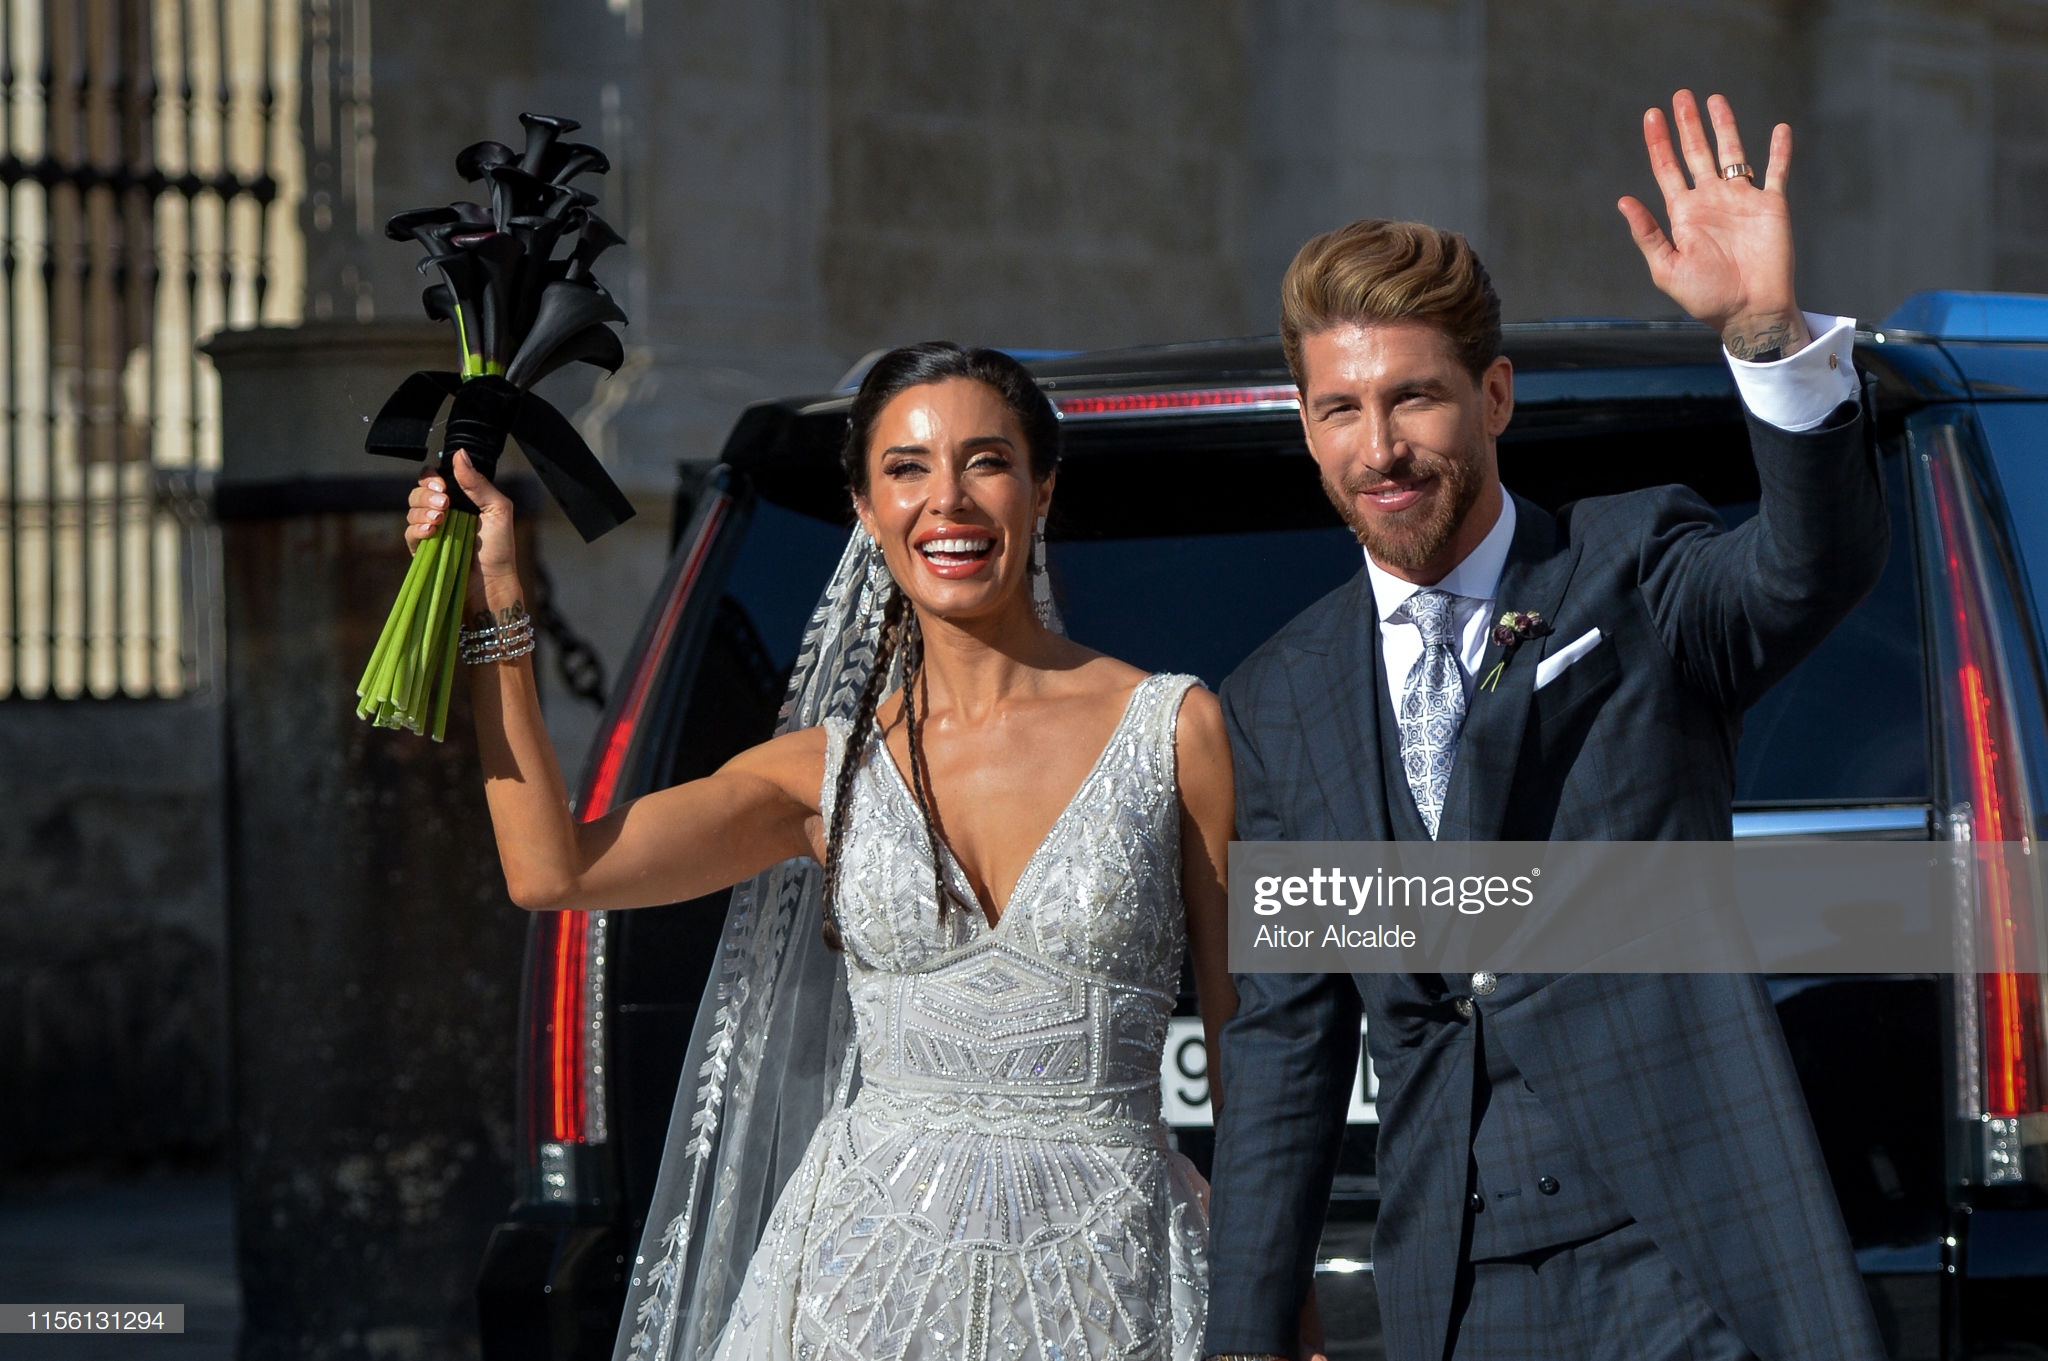 gettyimages-1156131294-2048x2048.jpg